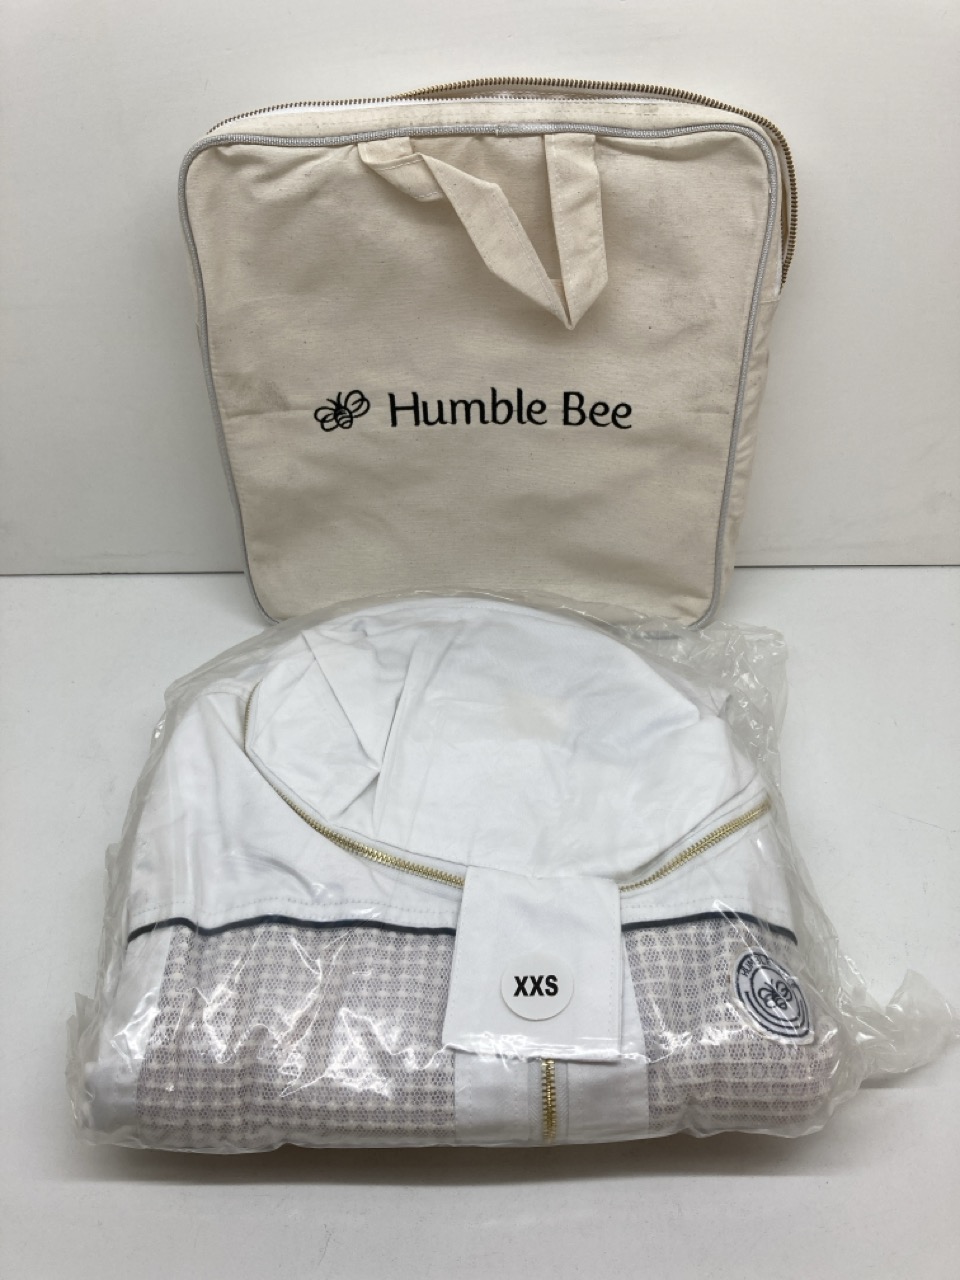 5 X HUMBLE BEE, POLYCOTTON BEEKEEPING SUITS, WITH ROUND VEIL